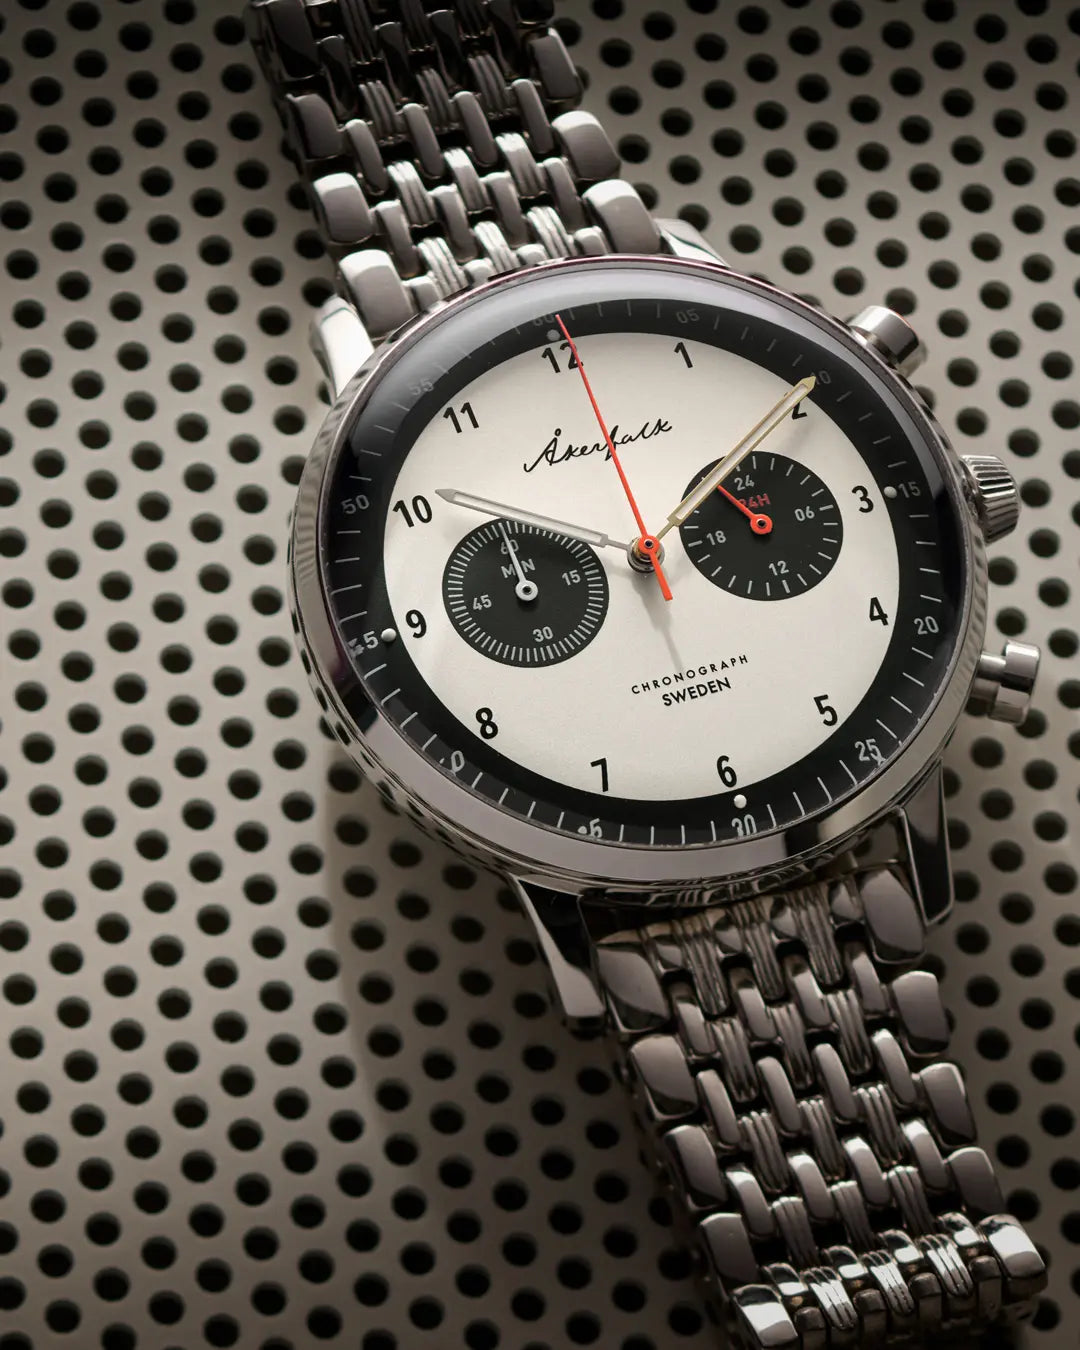 Chronograph watch from Sweden